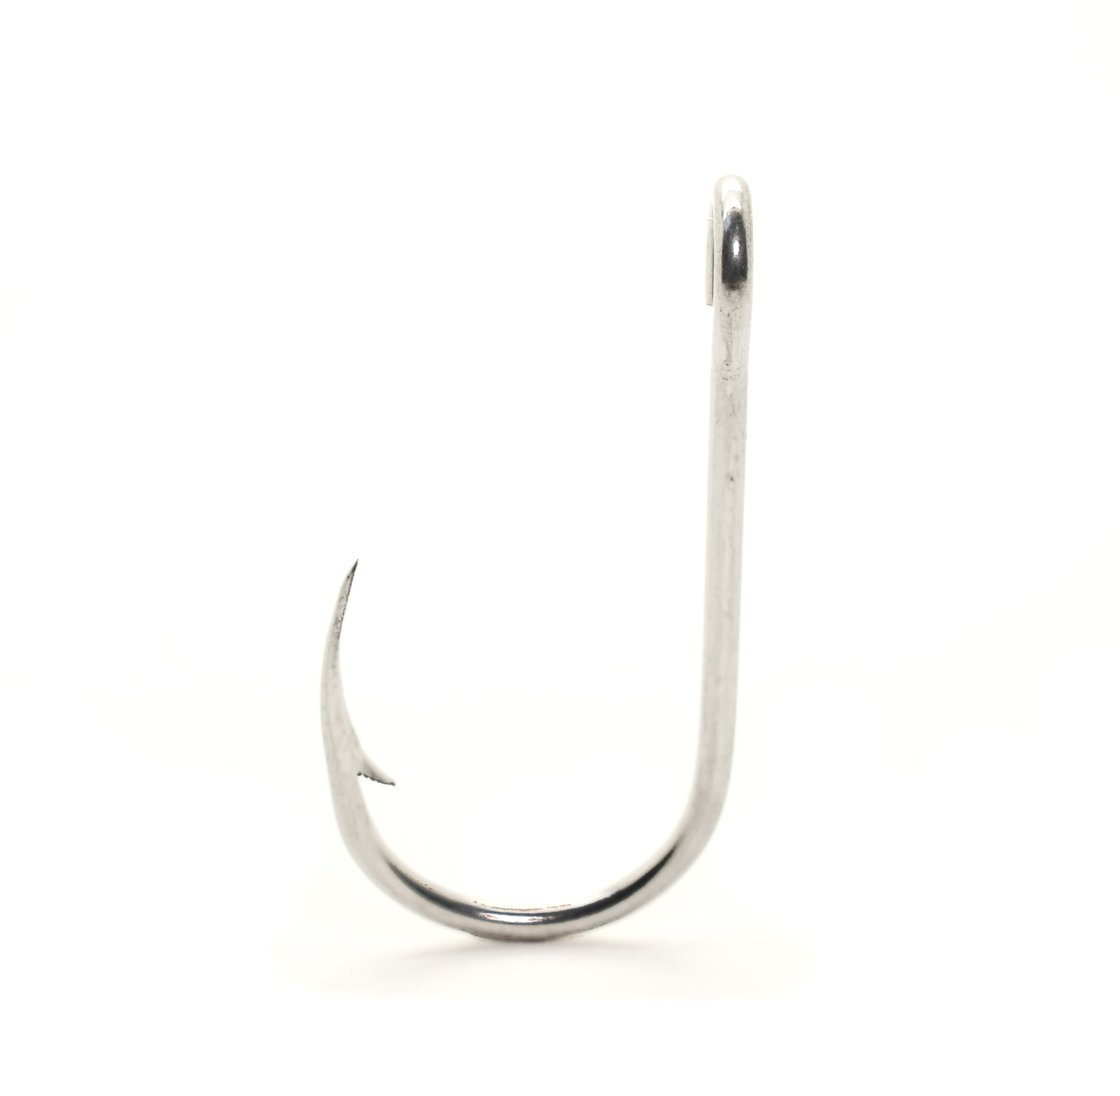 Mustad 95170-SS Salmon Siwash - 3x Strong - Stainless Steel Hooks (Box 100)